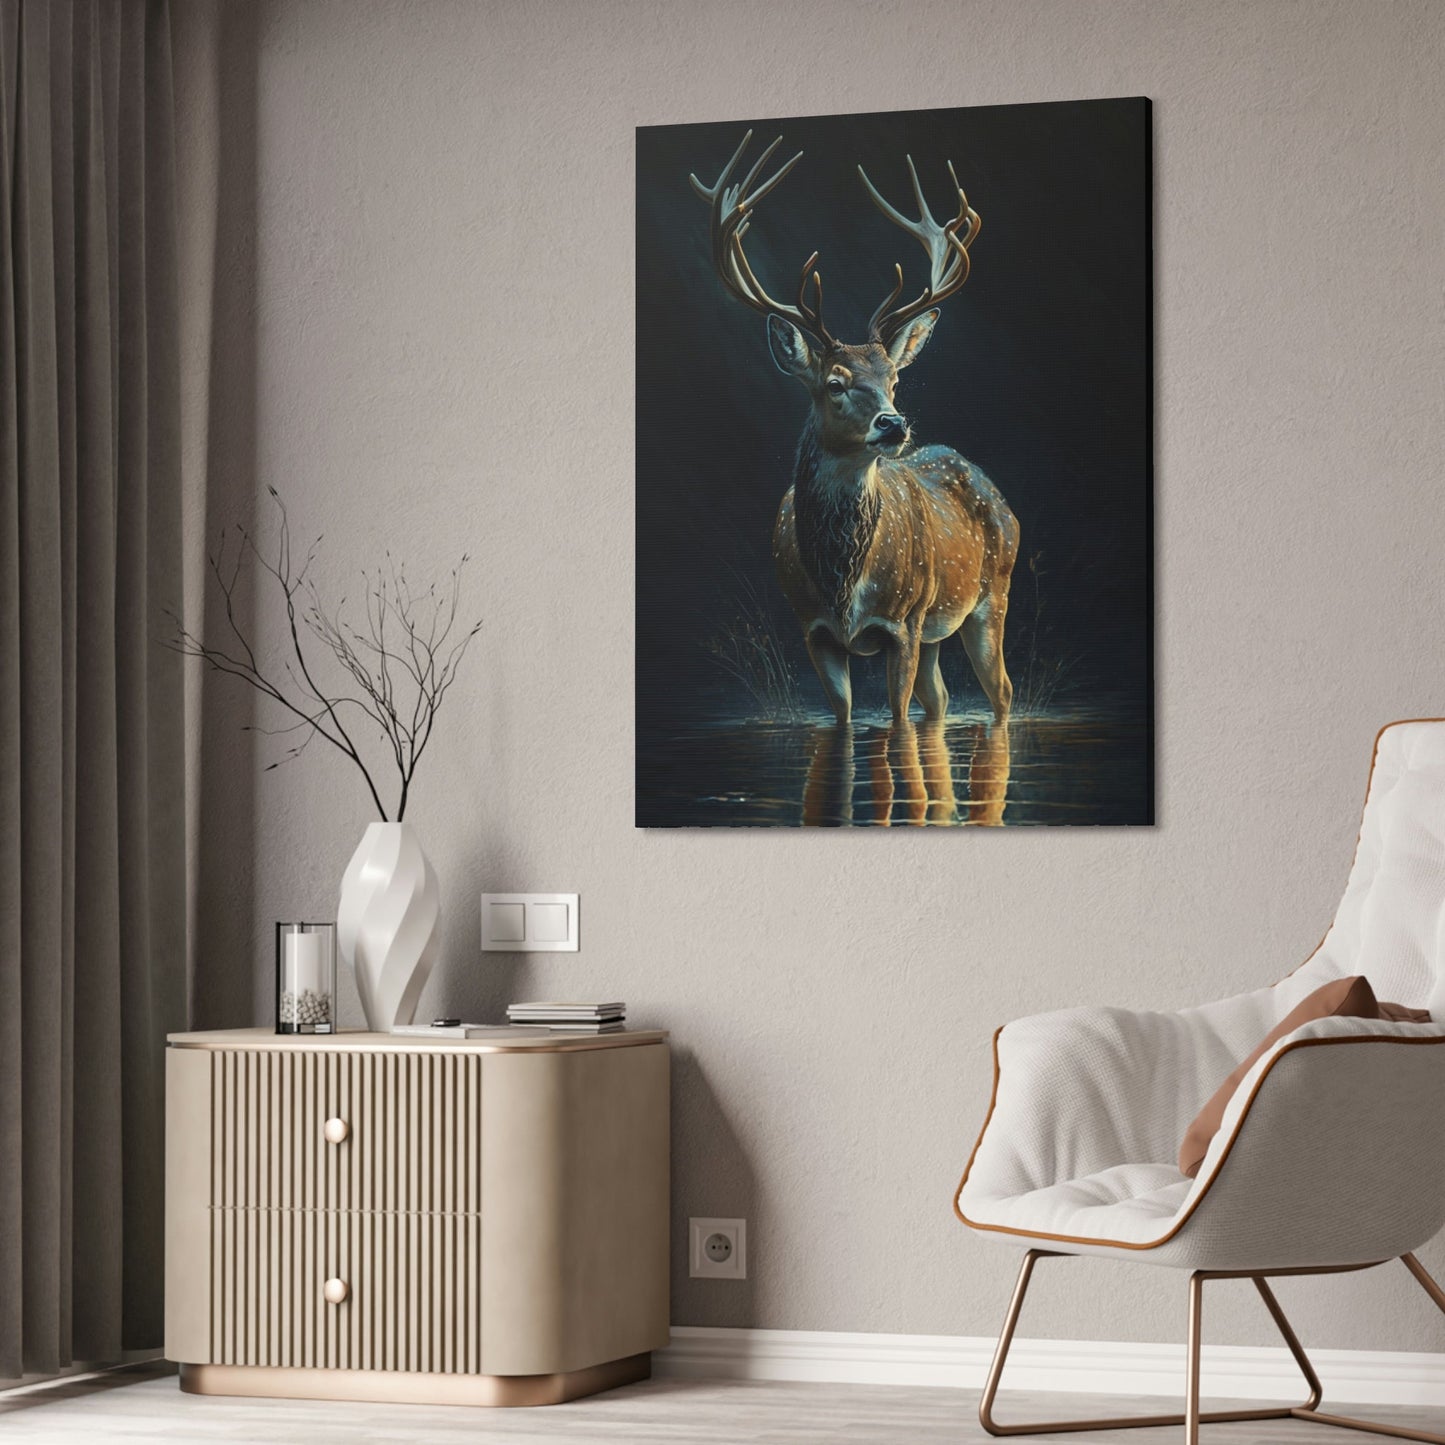 The Grace of Deer: A Canvas Artistic Expression